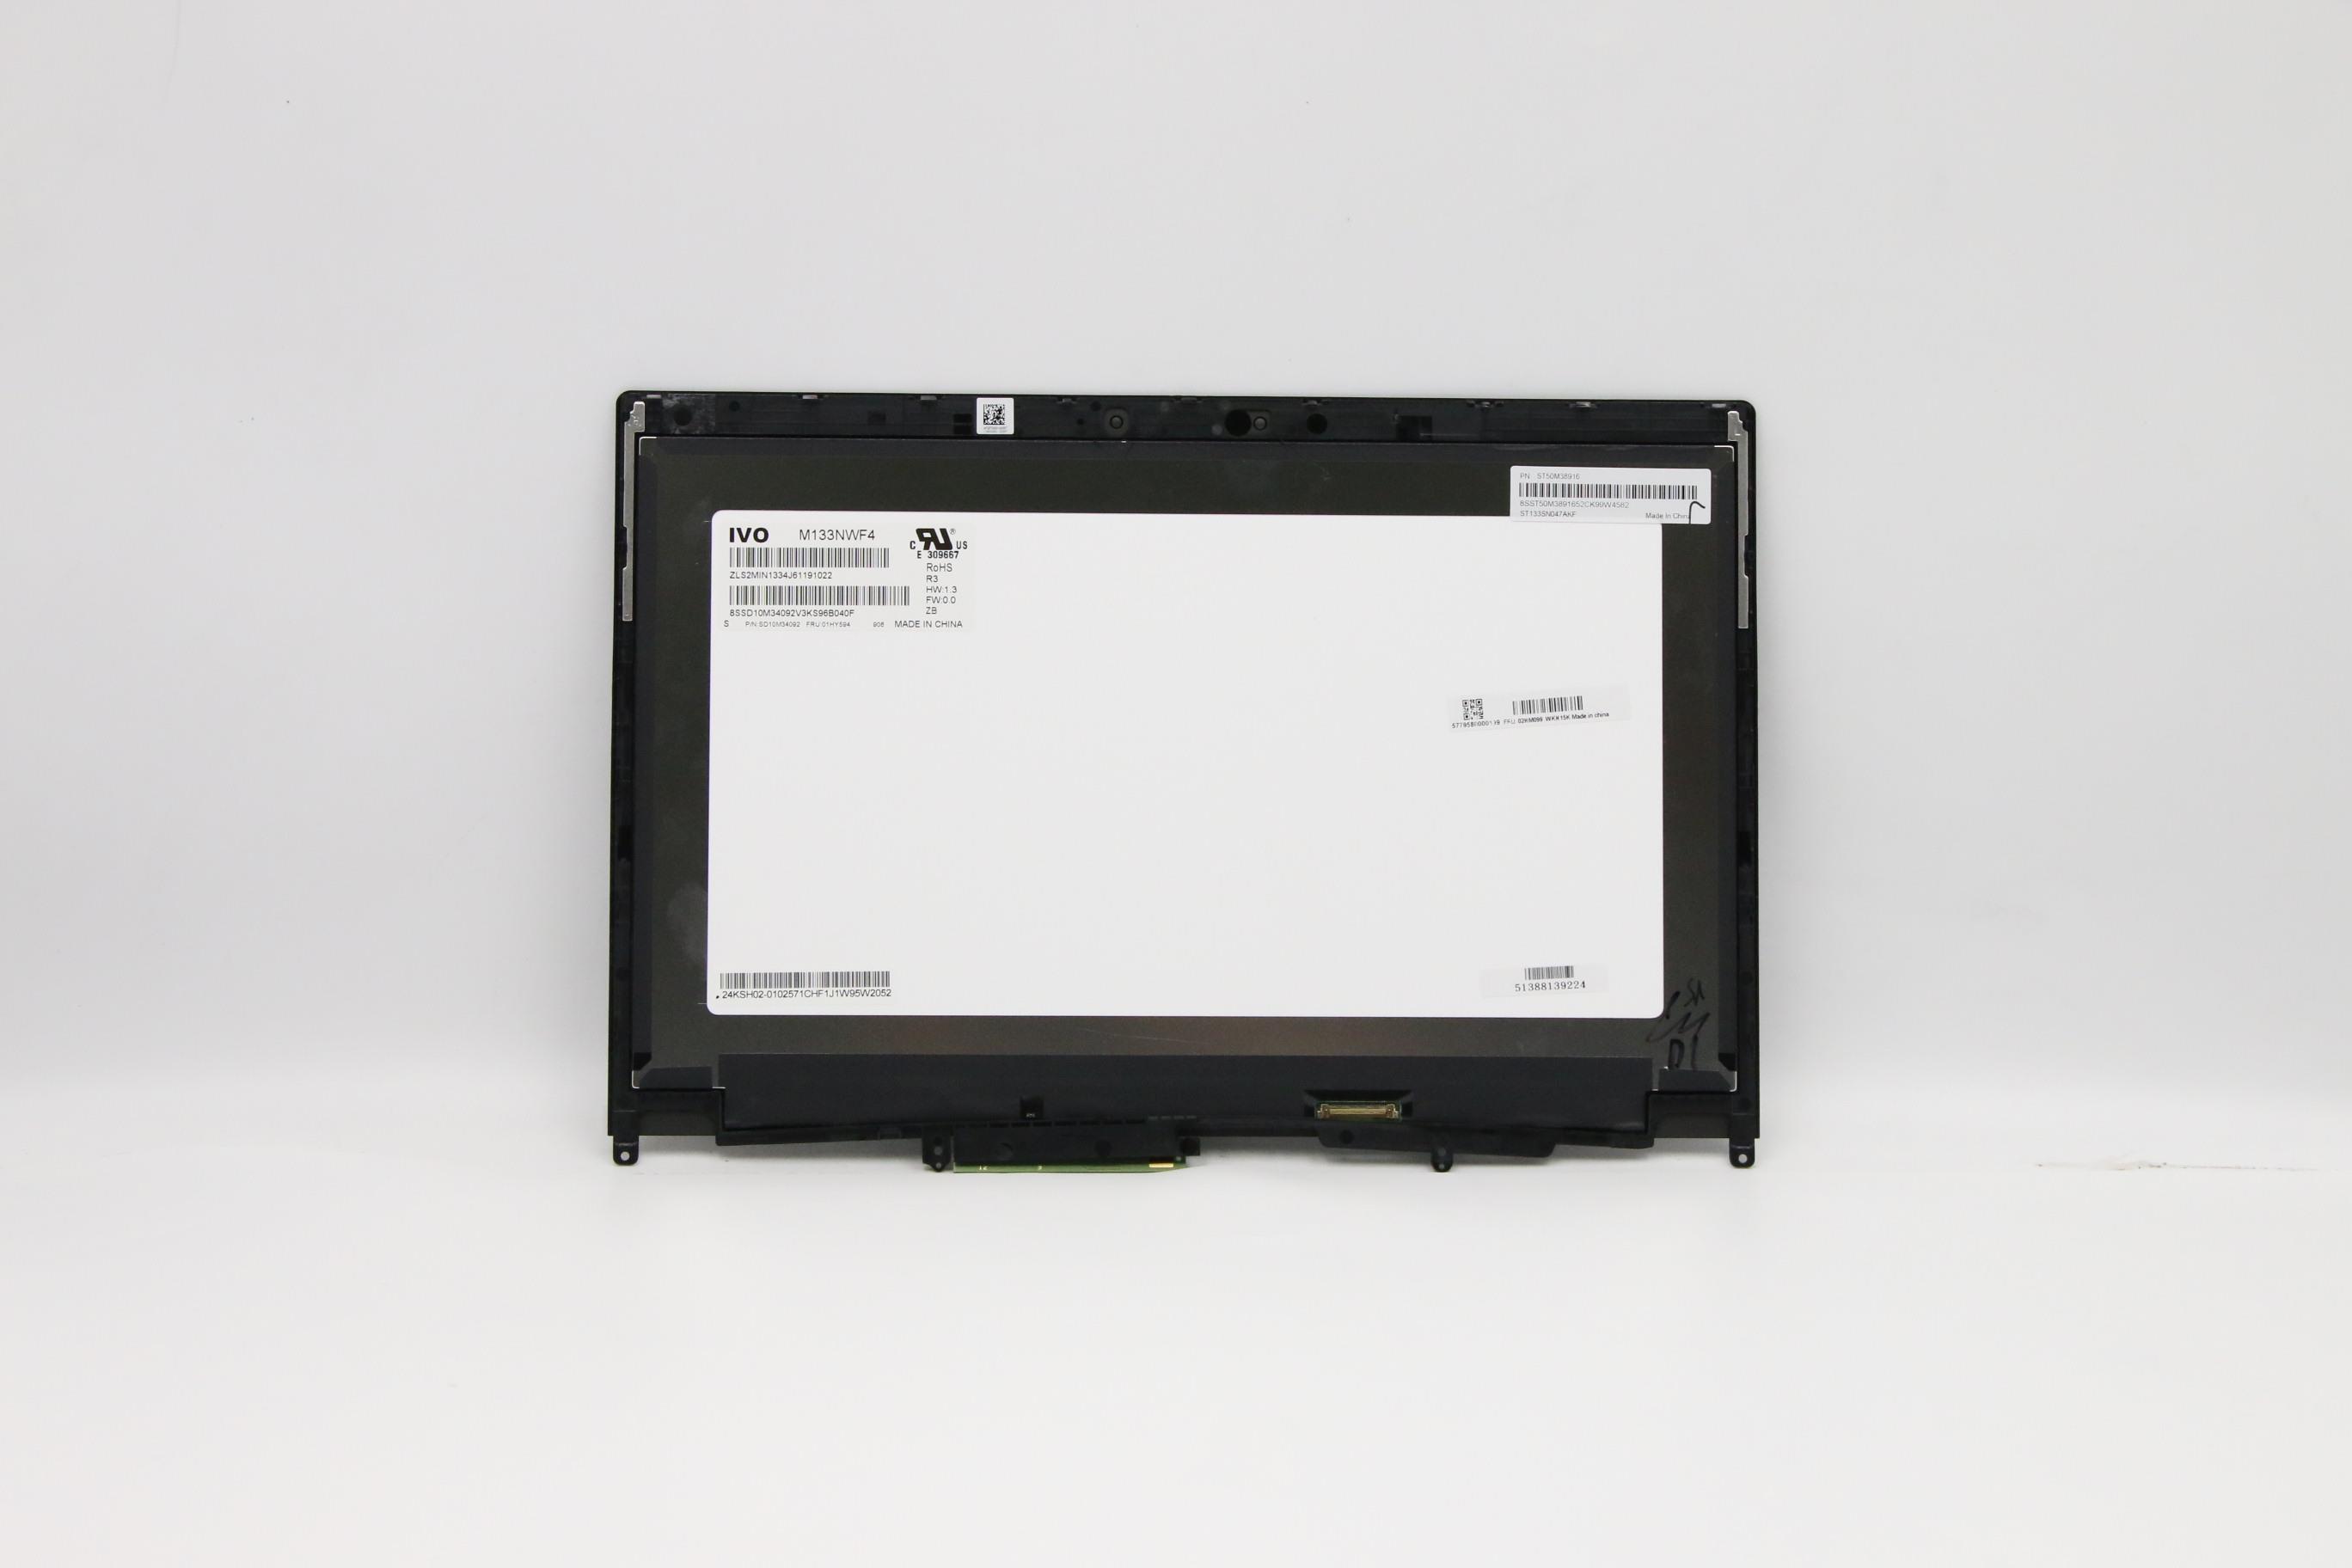 Lenovo Part  Original Lenovo LCD Assembly, 13.3", FHD, Touch, Anti-Glare, IPS, 300nit, with B Bezel and touch control board, IVO+Laibao FHD W/Cam